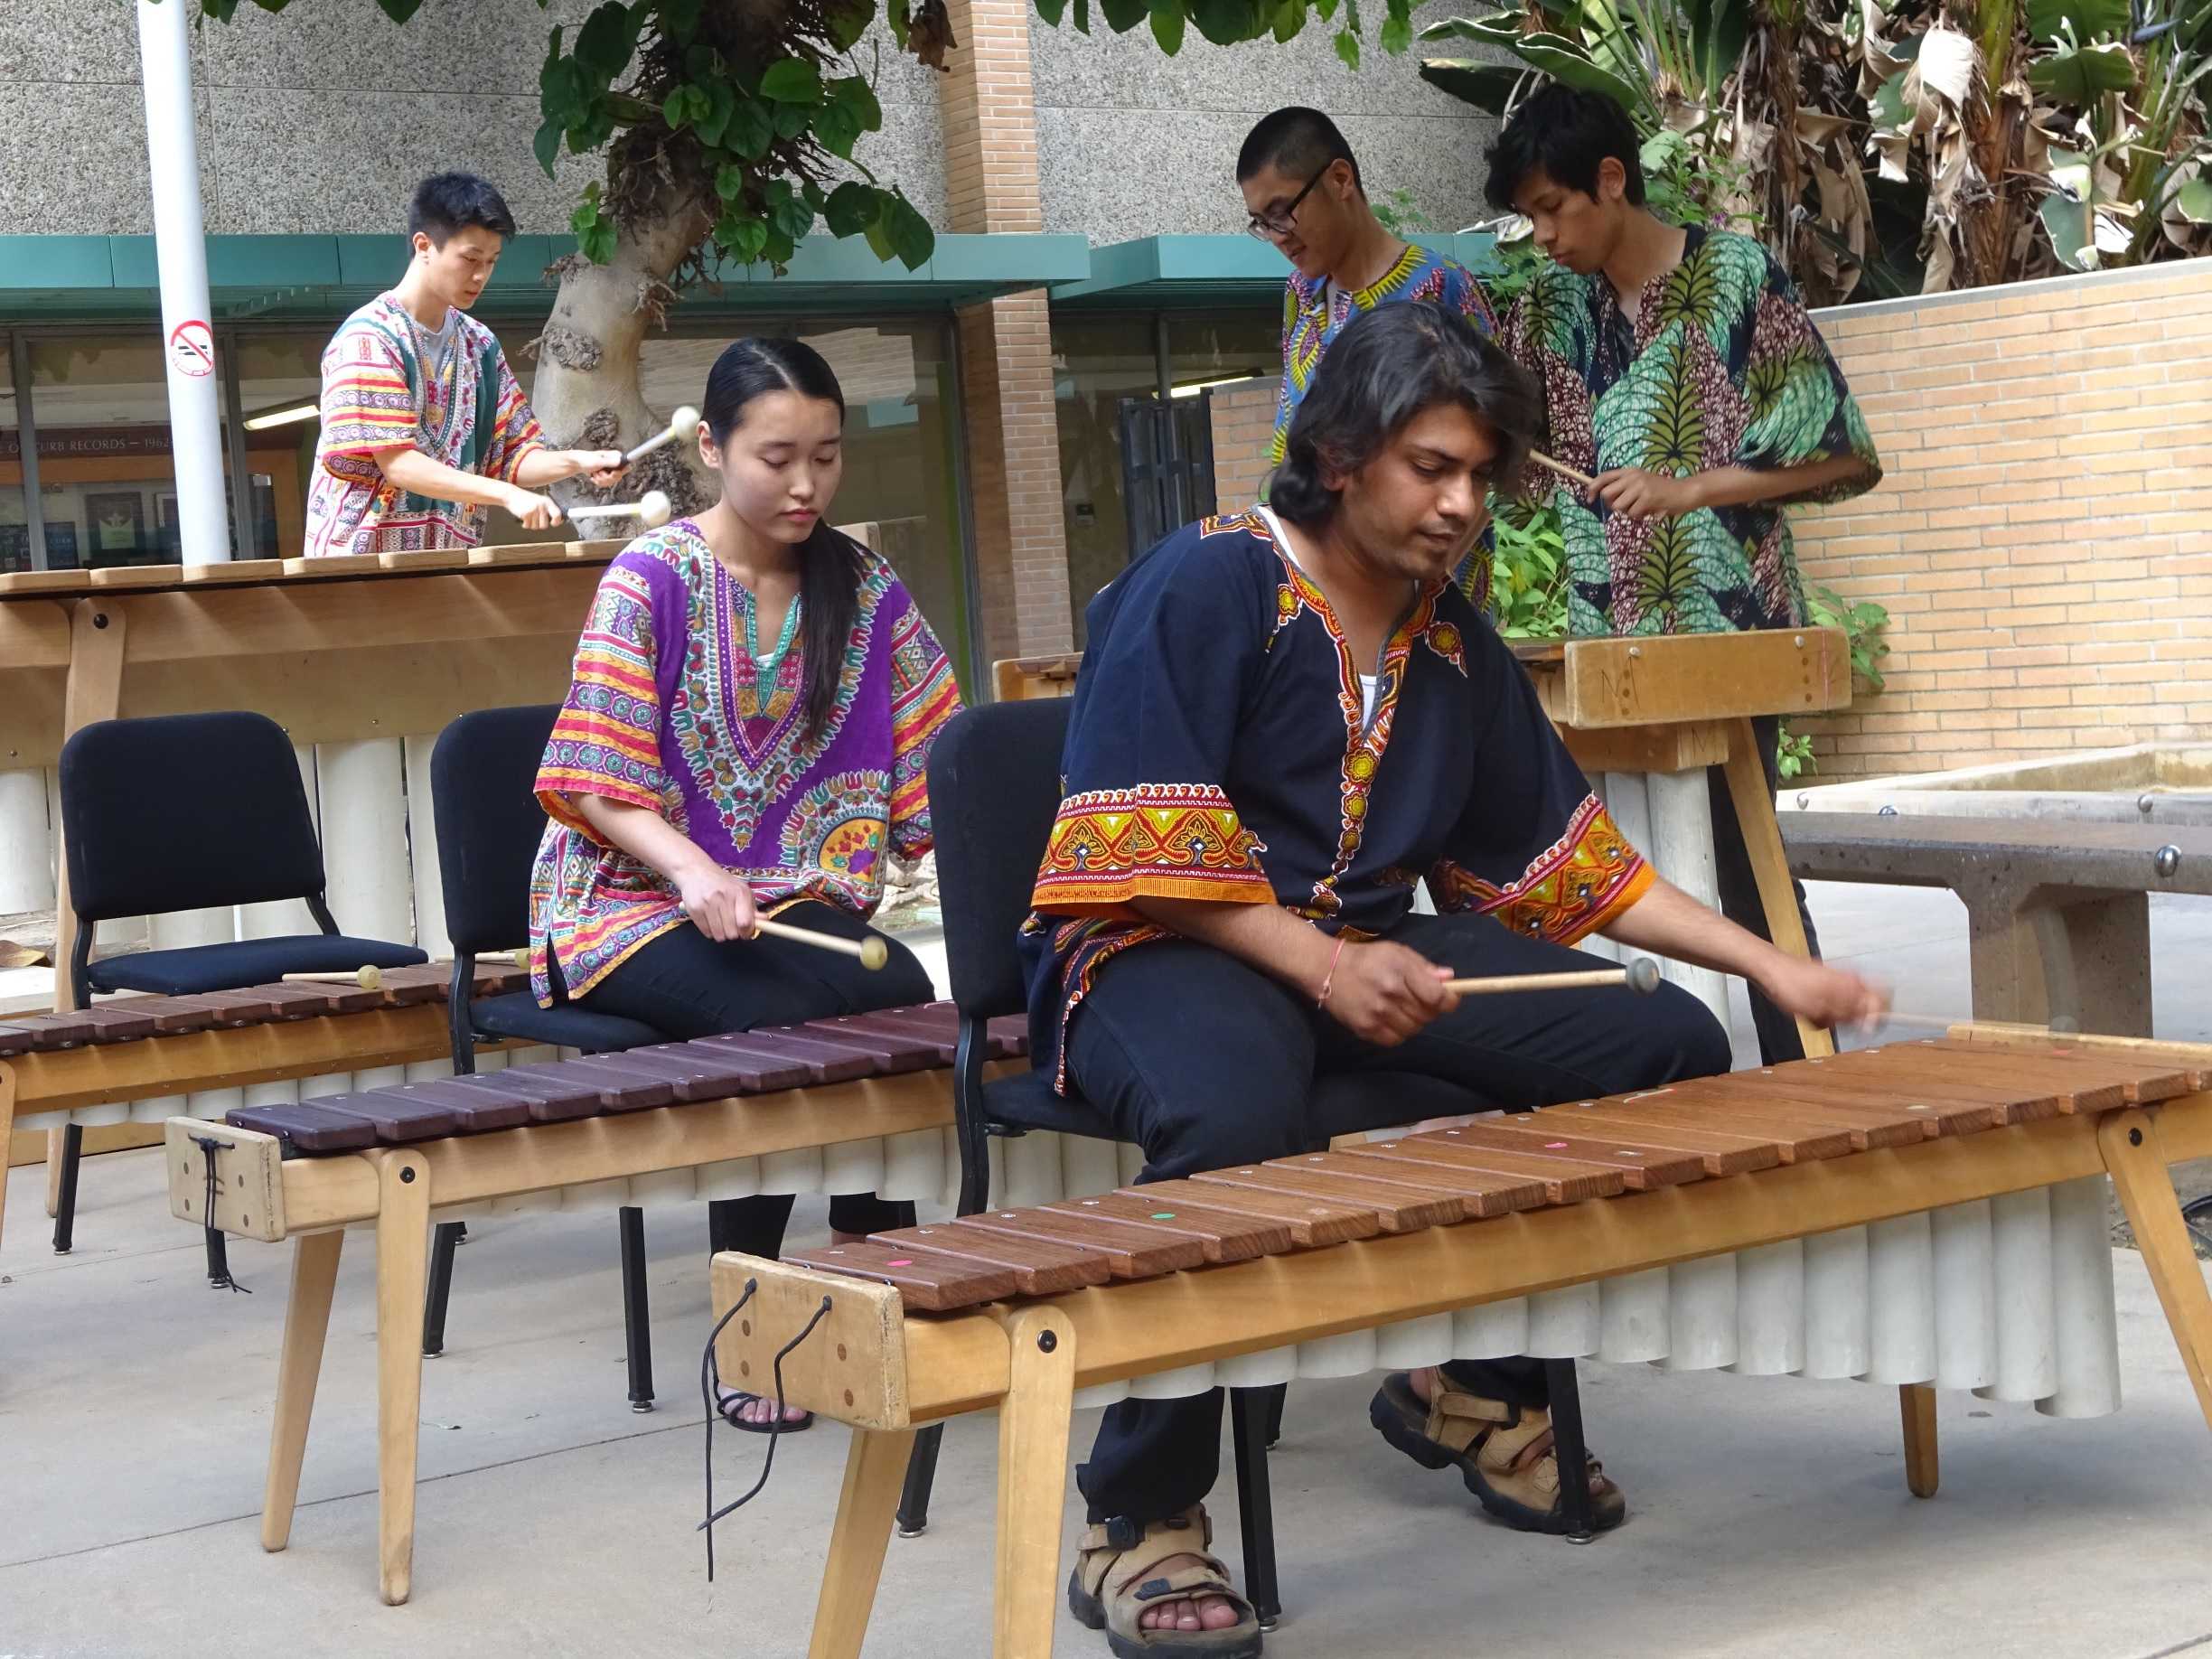 Several students pictured playing marimbas